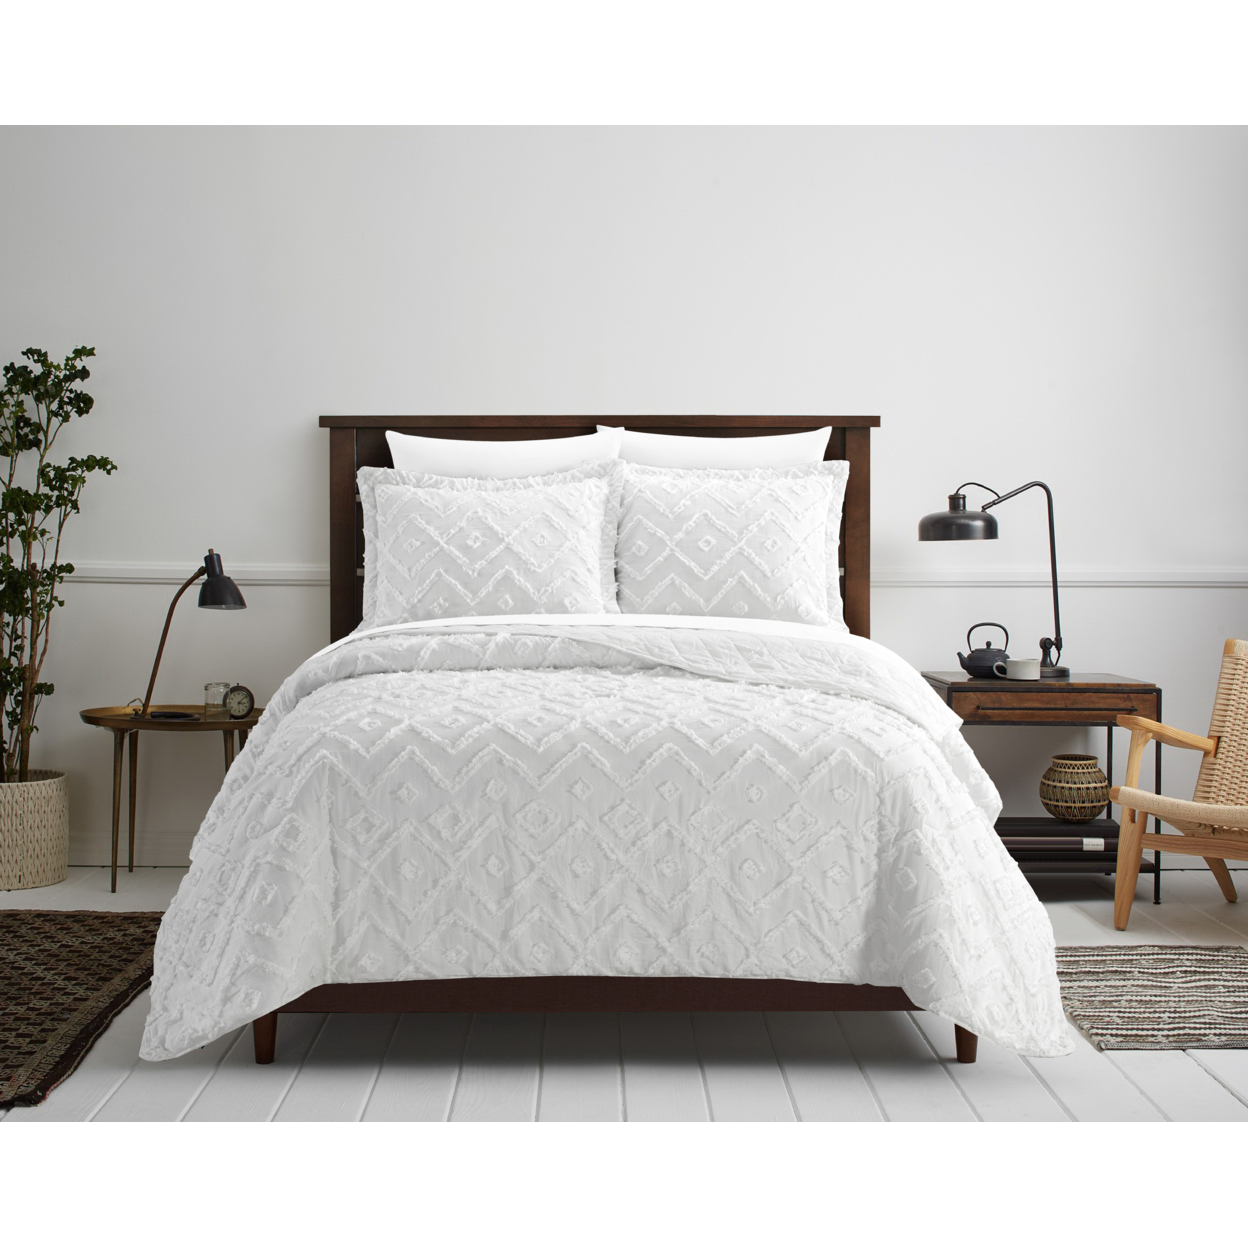 NY&C Home Dody 3 Piece Cotton Quilt Set Clip Jacquard Geometric Pattern Bedding - White, Queen